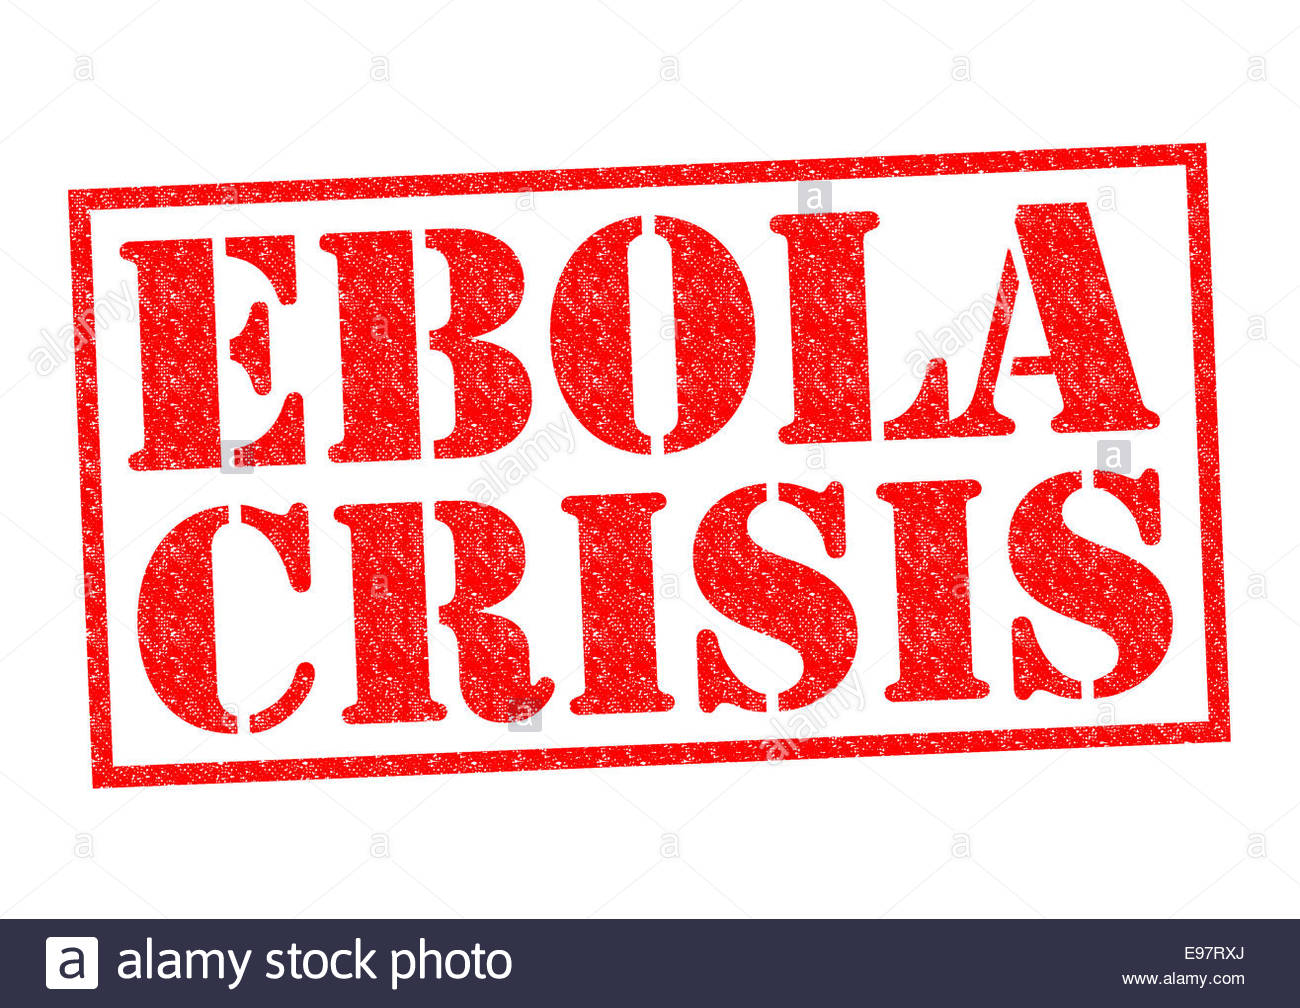 Ebola Crisis Red Rubber Stamp Over A White Background Stock Photo